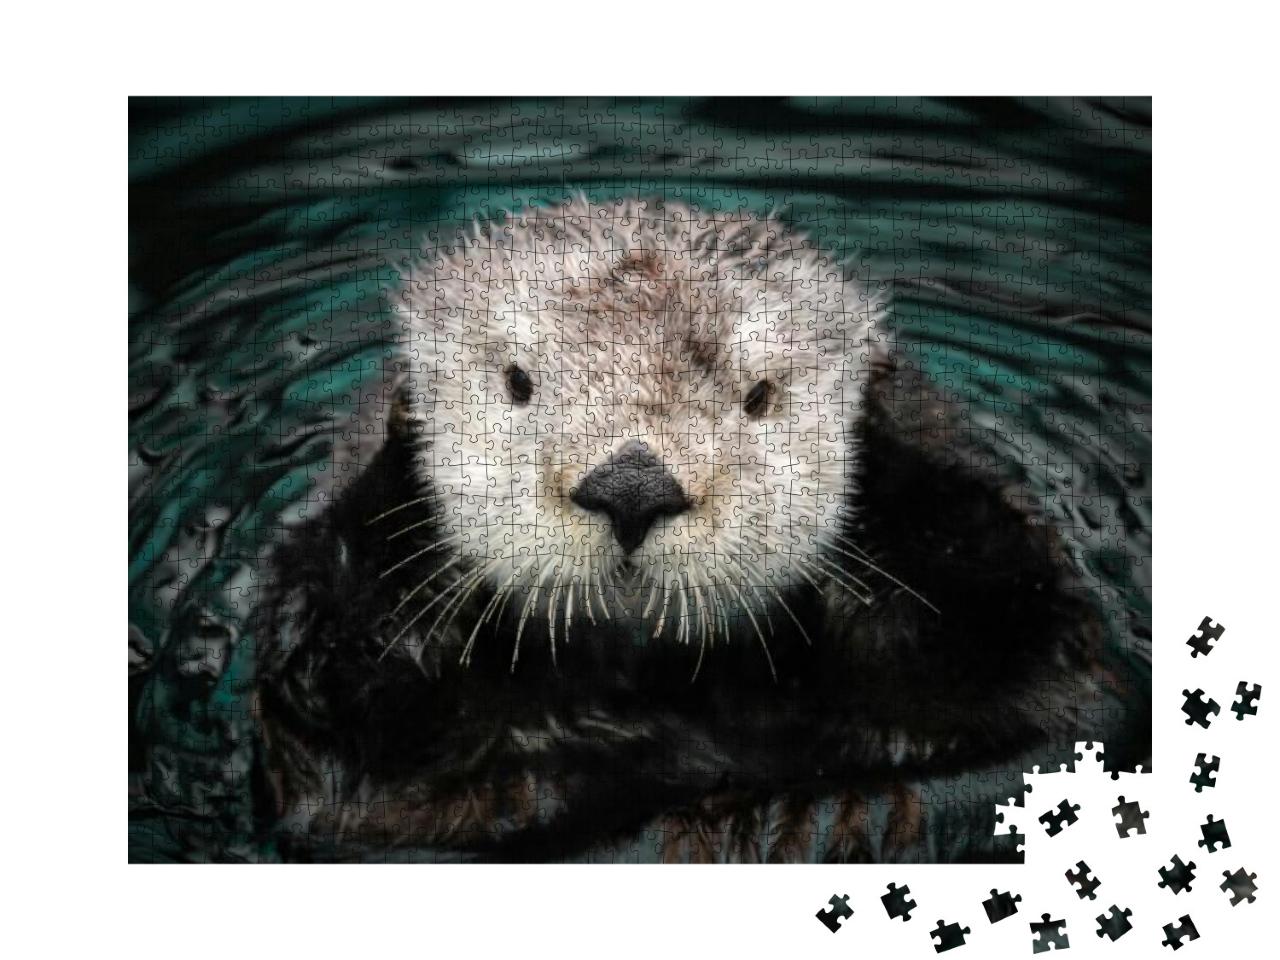 Sea Otter Posing in the Water... Jigsaw Puzzle with 1000 pieces